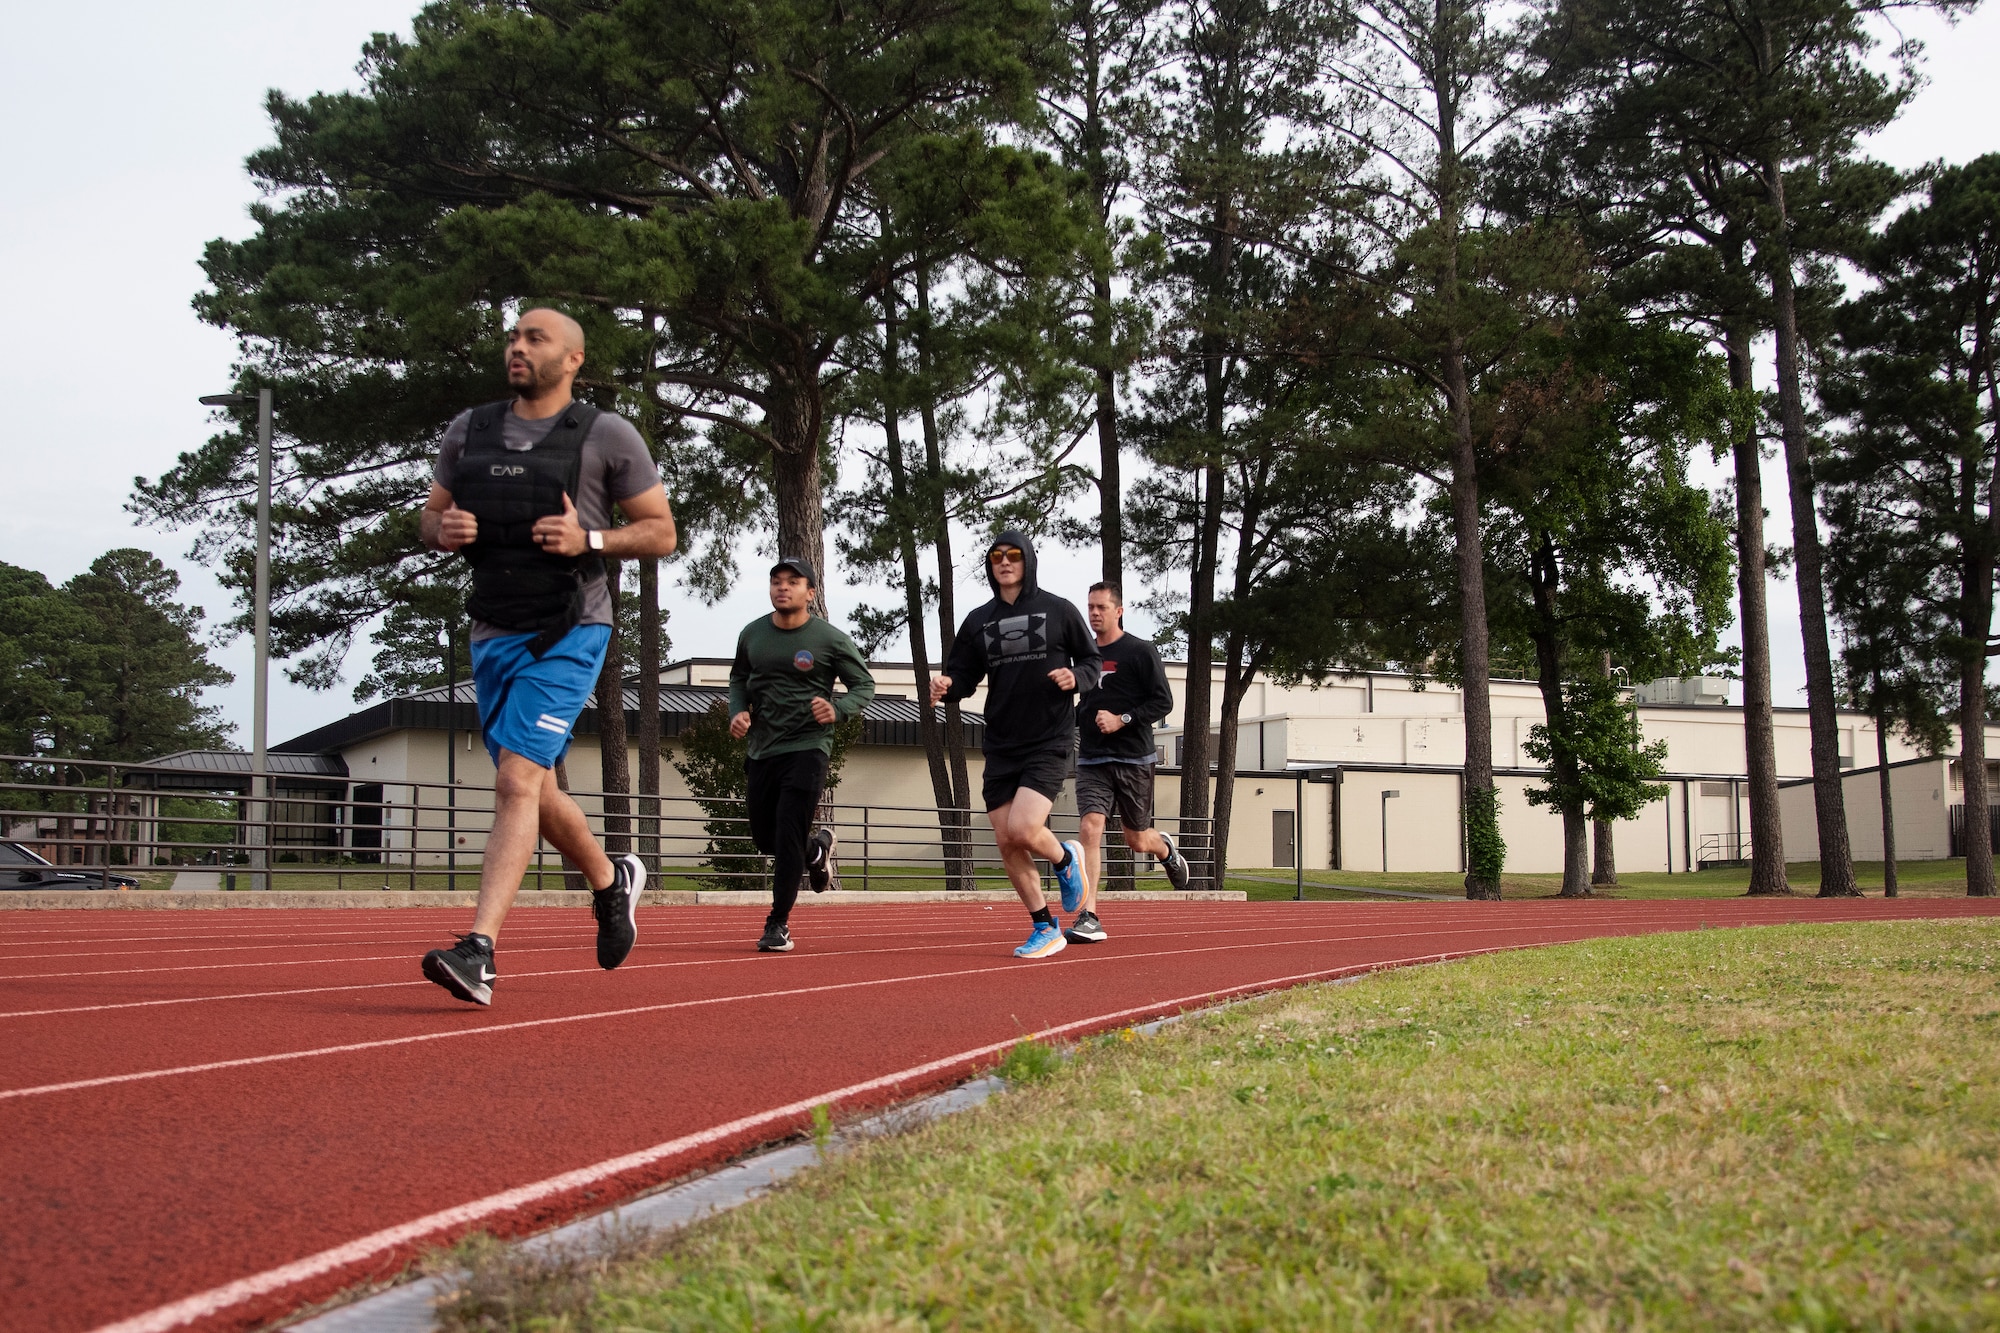 Airmen run down a track as part of the annual Murph Challenge at Seymour Johnson Air Force Base, North Carolina, May 25, 2023. Participants tested their physical and mental resilience to complete a 1-mile run, 100 pull ups, 200 push-ups, 300 air squats, and a culminating 1-mile run, with some members donning a weighted vest, during the challenge. Members of Team Seymour participated in the annual event as a way to celebrate the memory of U.S. Navy Seal Lieutenant Michael Murphy, who paid the ultimate sacrifice for his country in 2005. (U.S. Air Force photo by Tech. Sgt. Christopher Hubenthal)